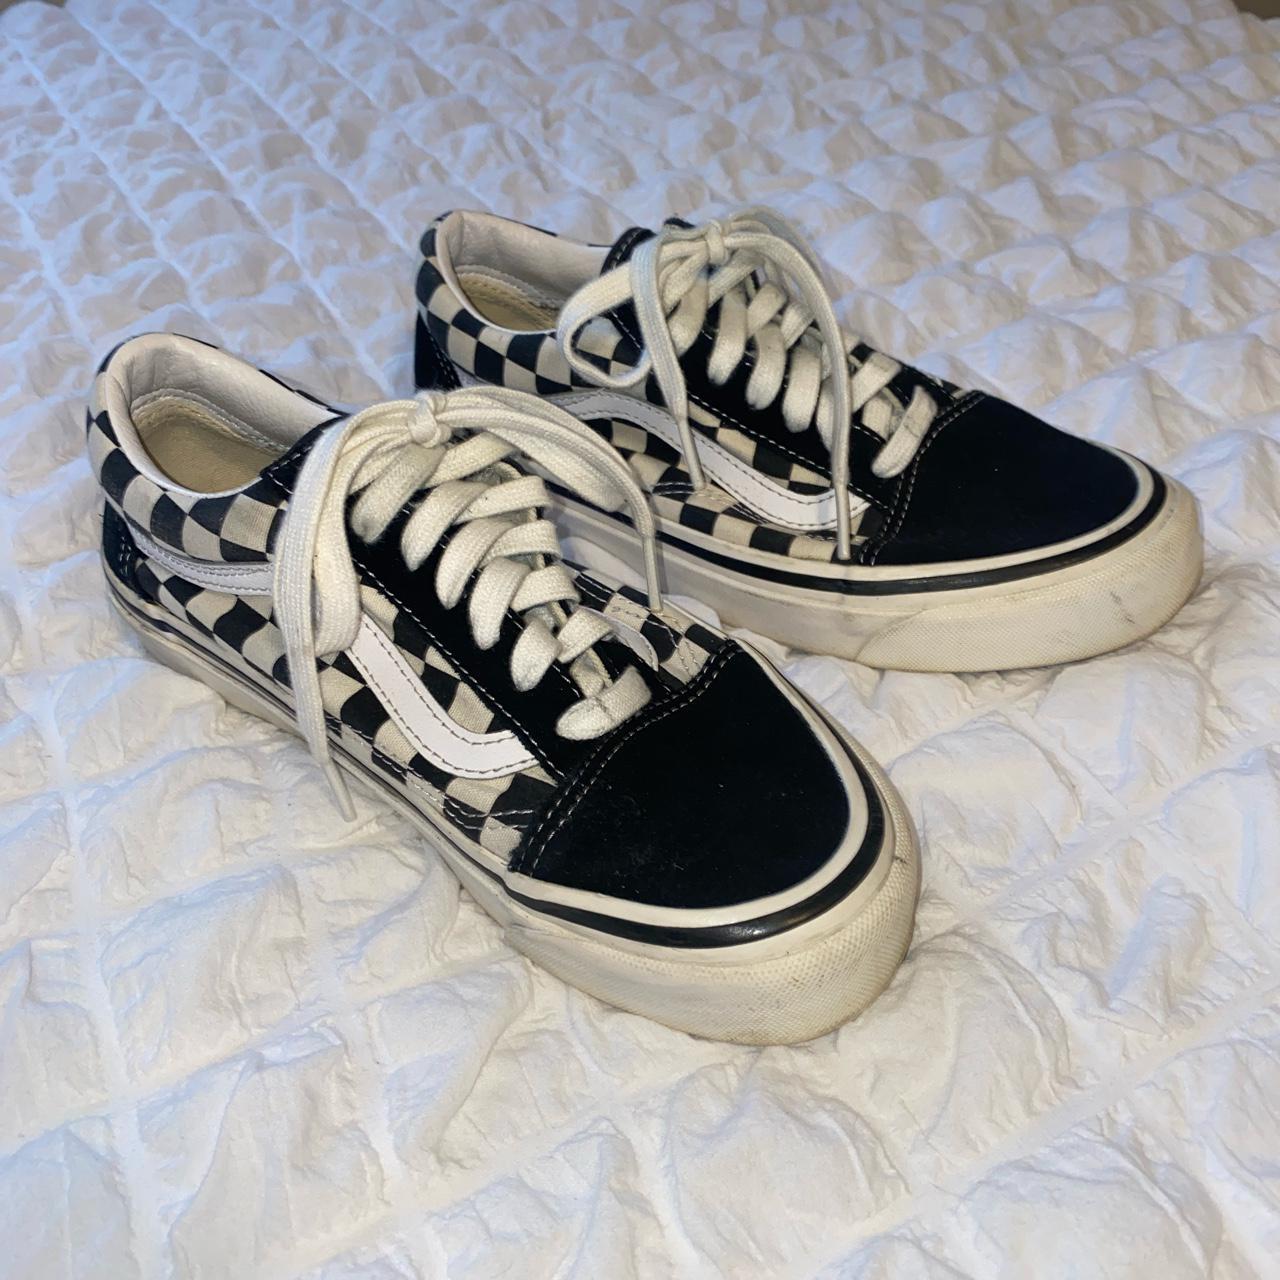 Product Image 2 - black and white checkered Vans